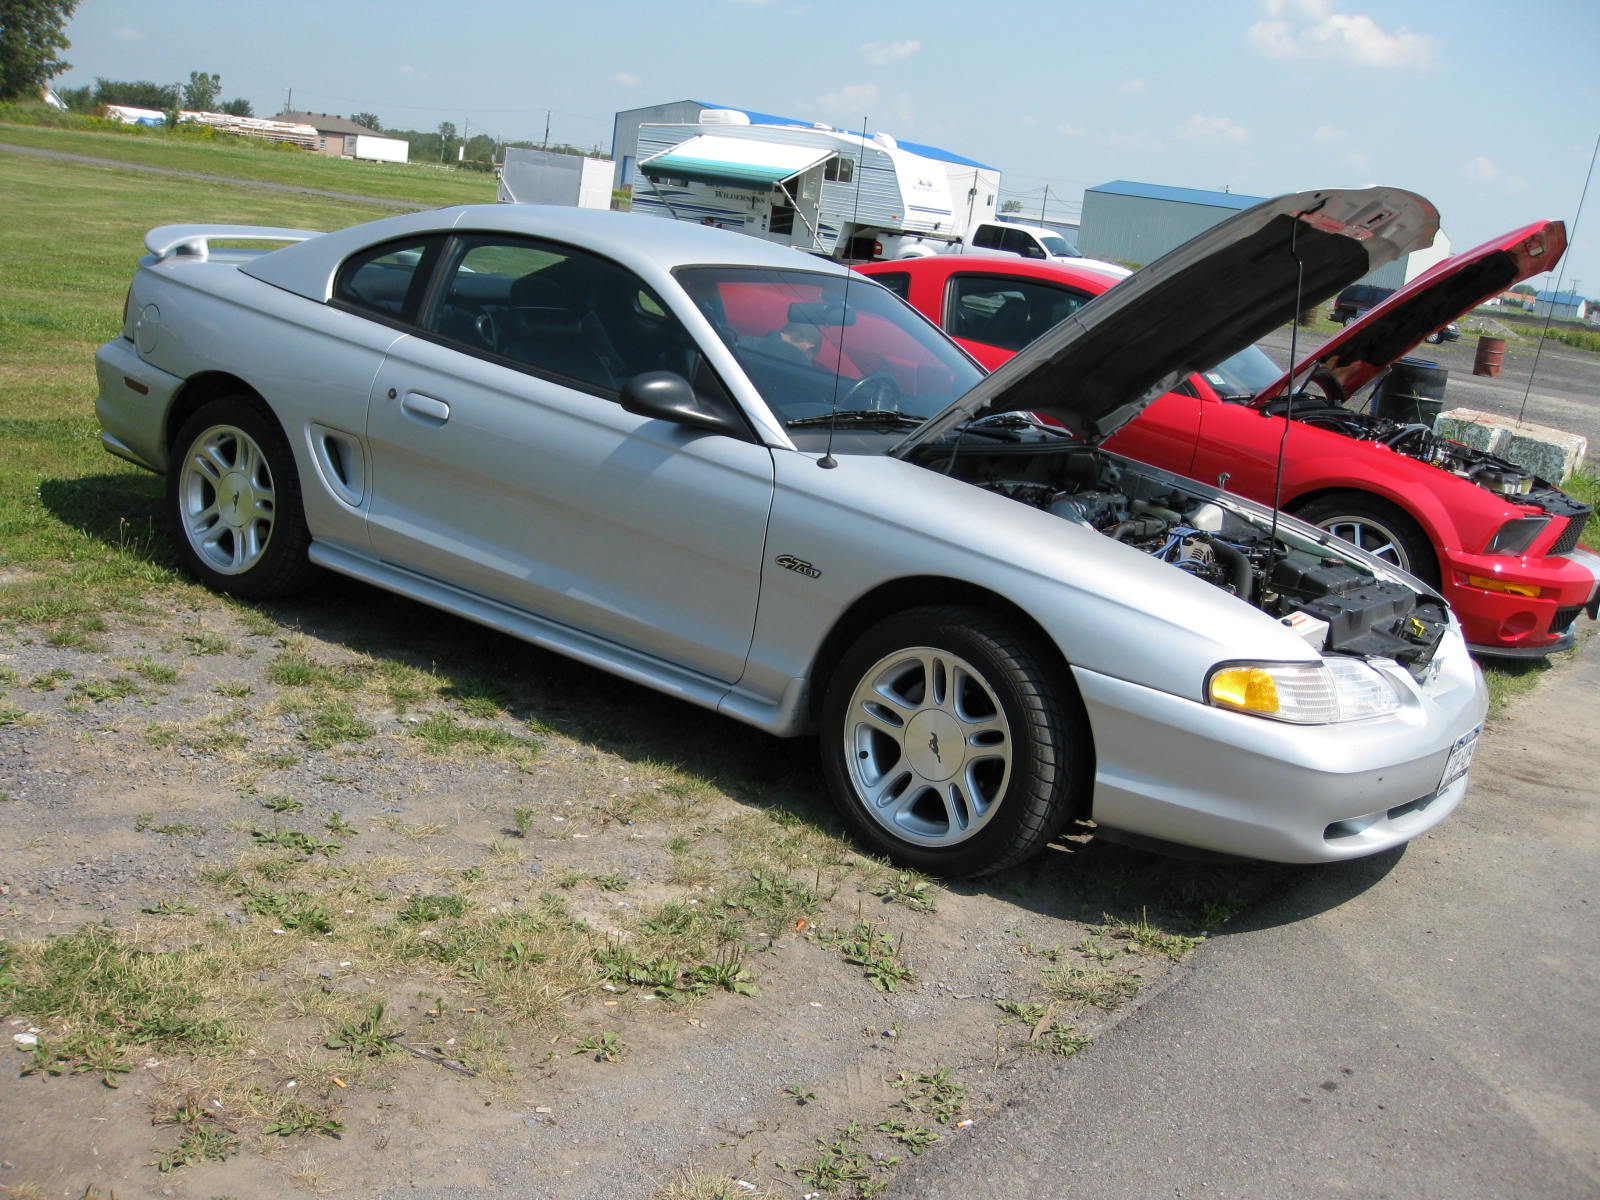  1998 Ford Mustang GT